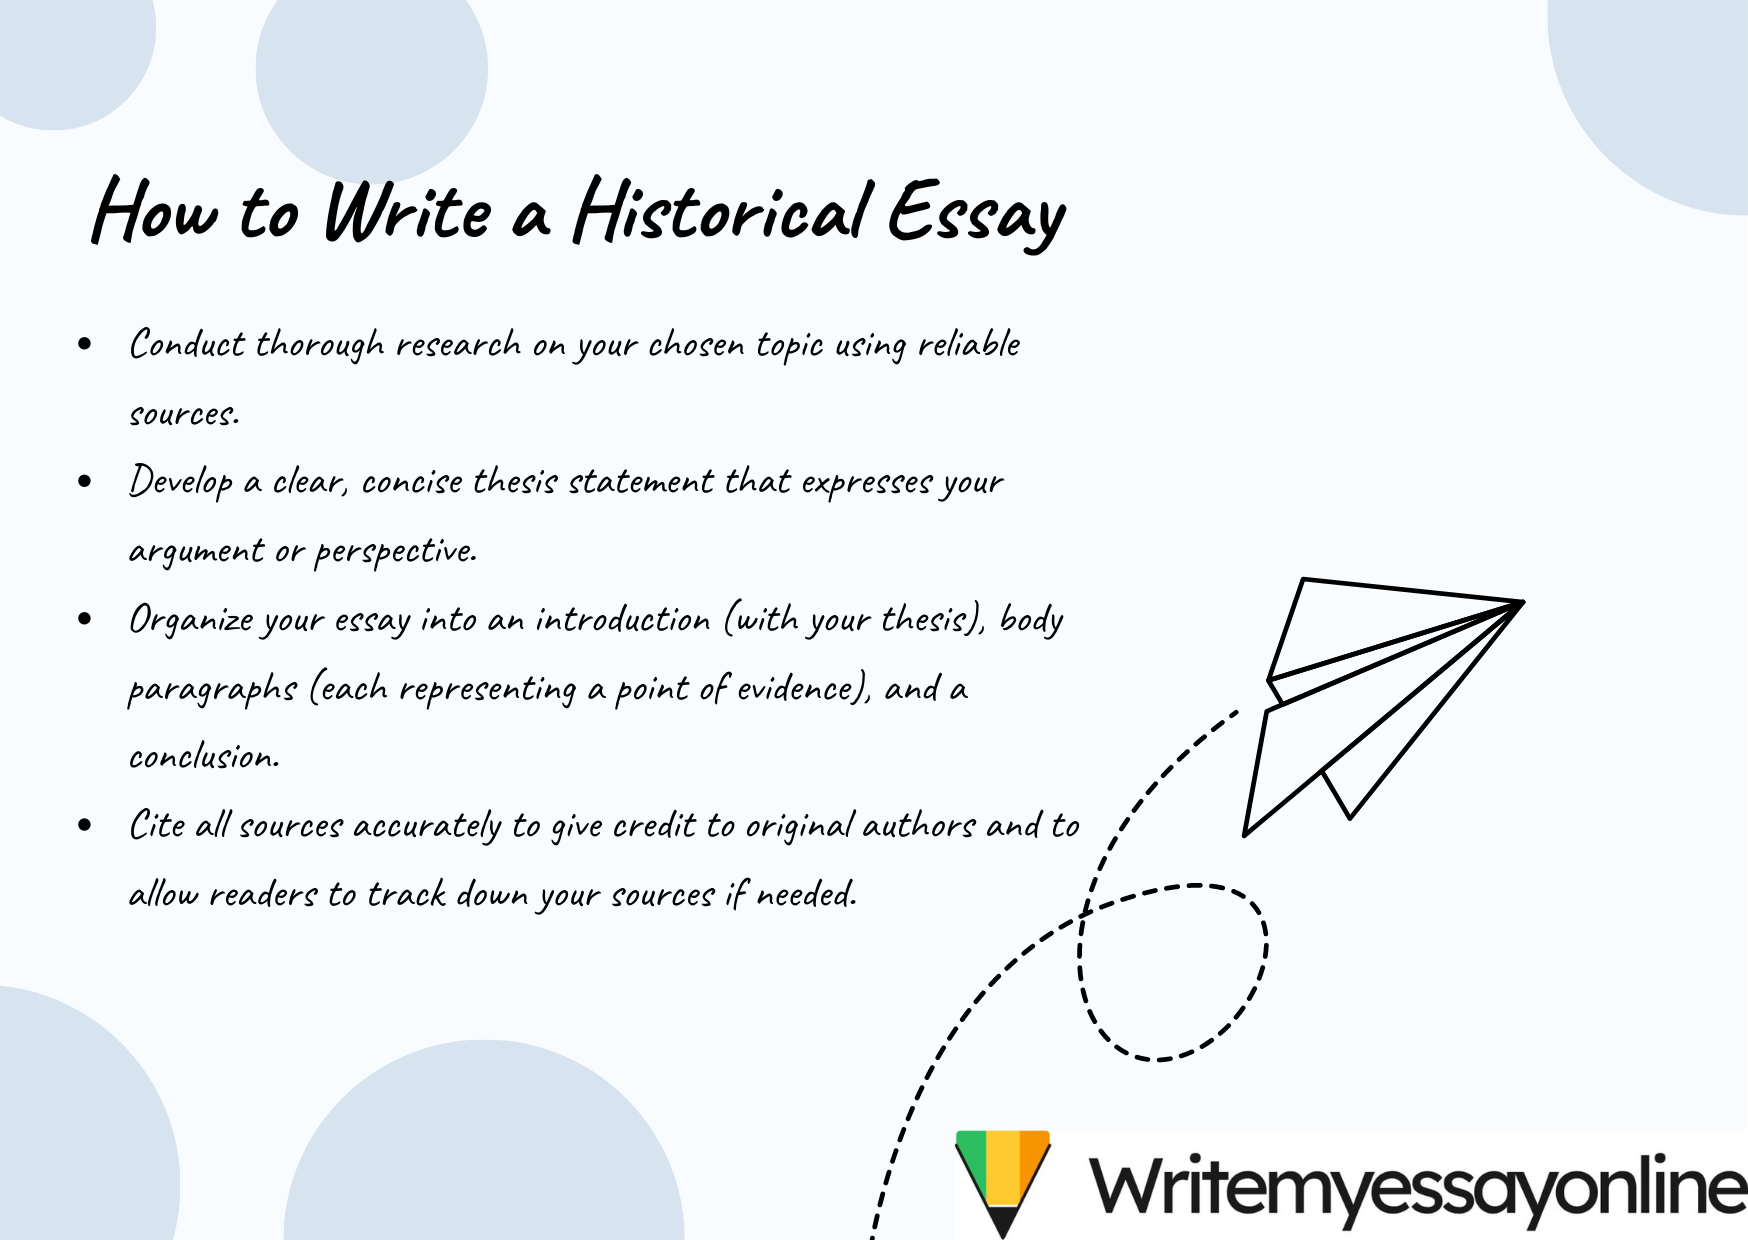 How to Write a Historical Essay